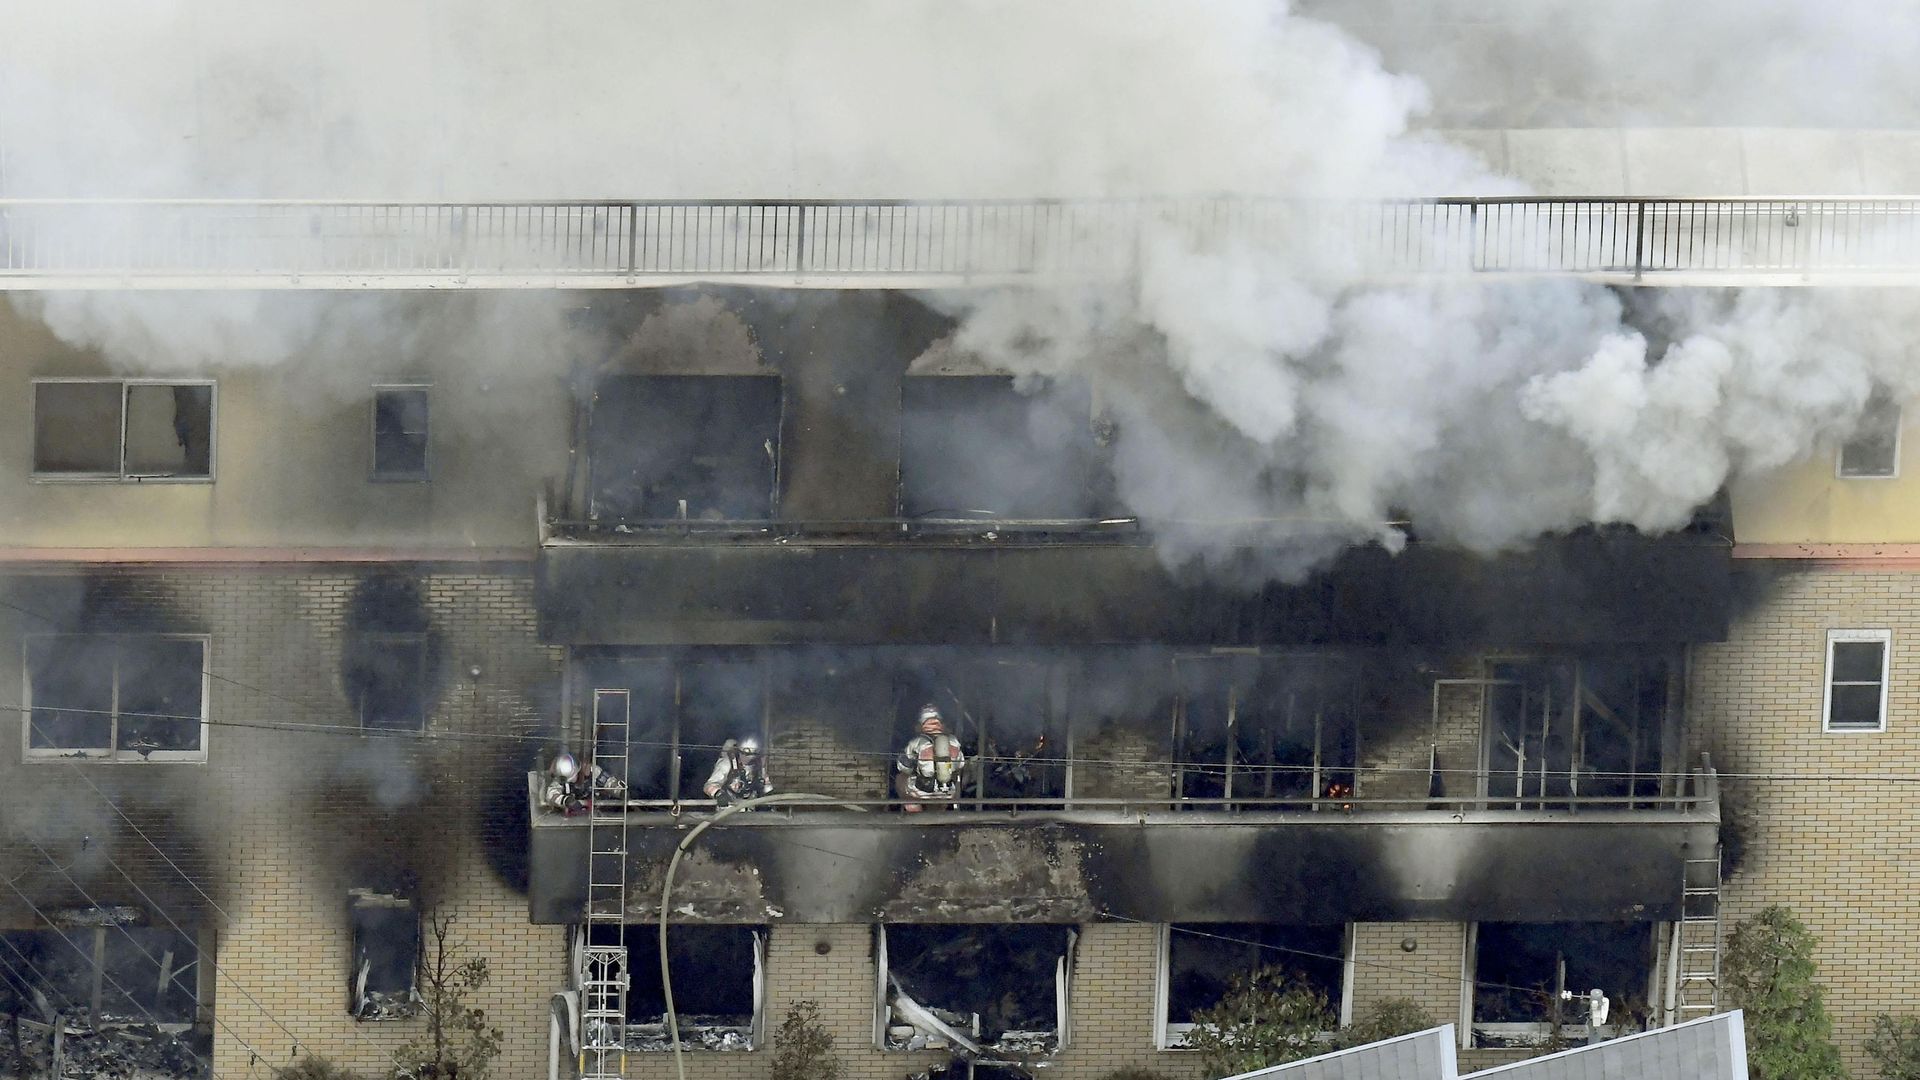 Firefighters battle a blaze at Kyoto Animation in Japan.